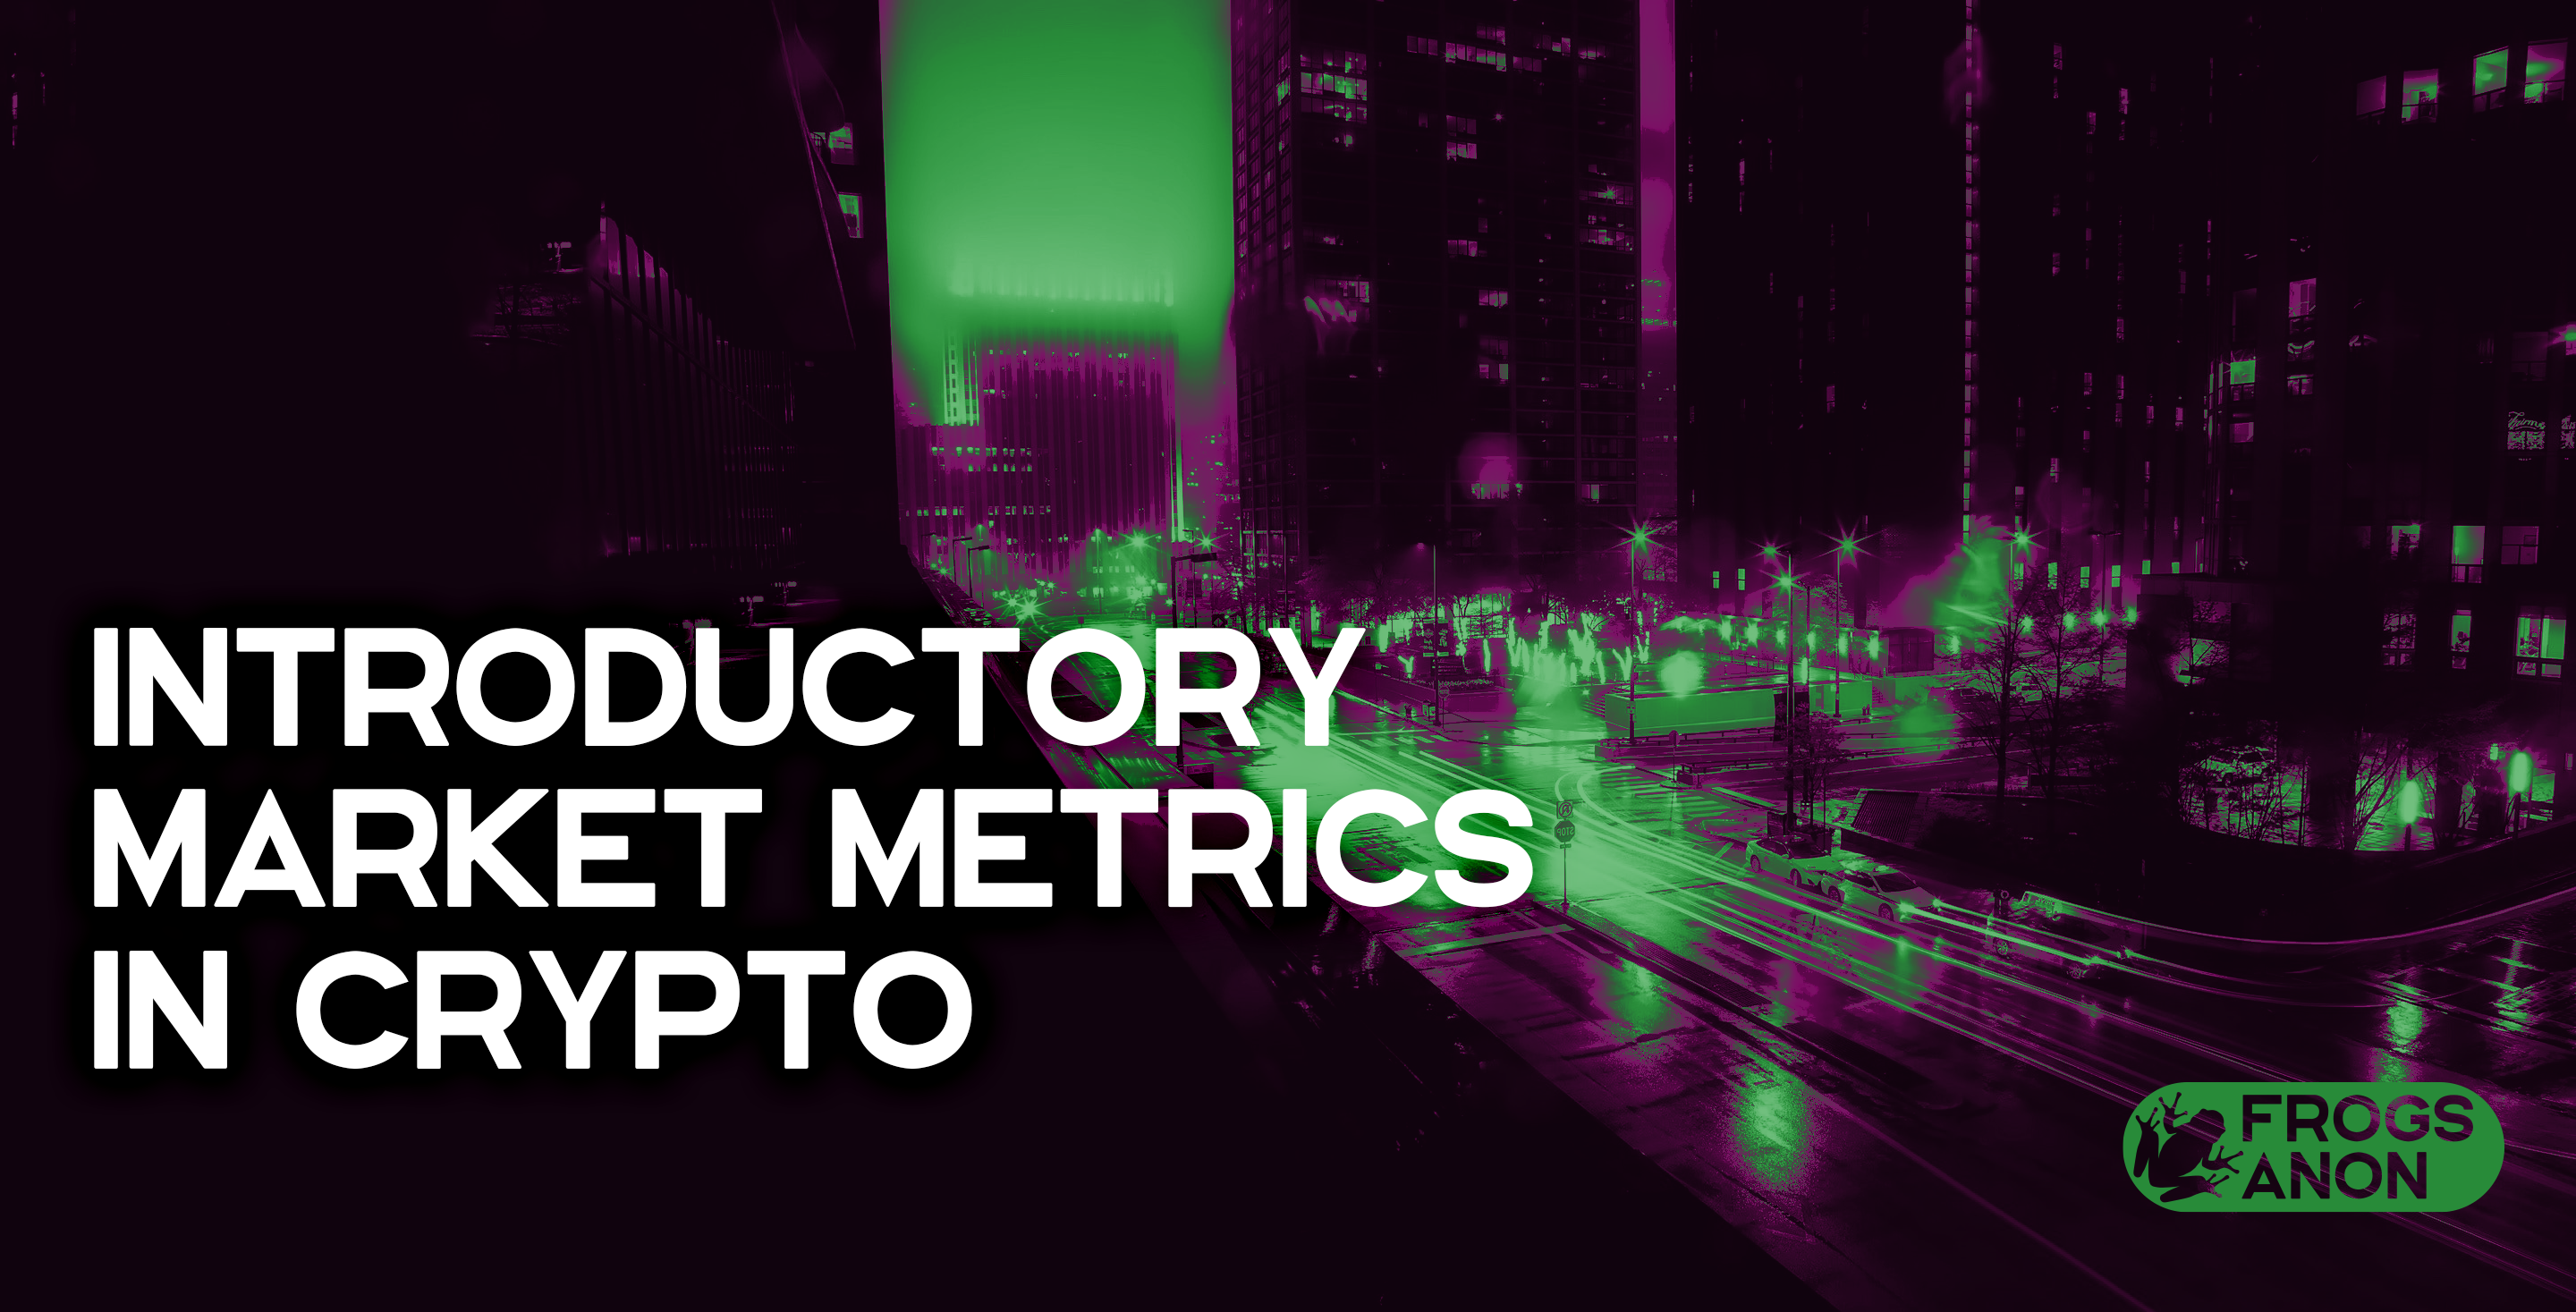 Introductory Market Metrics in Crypto